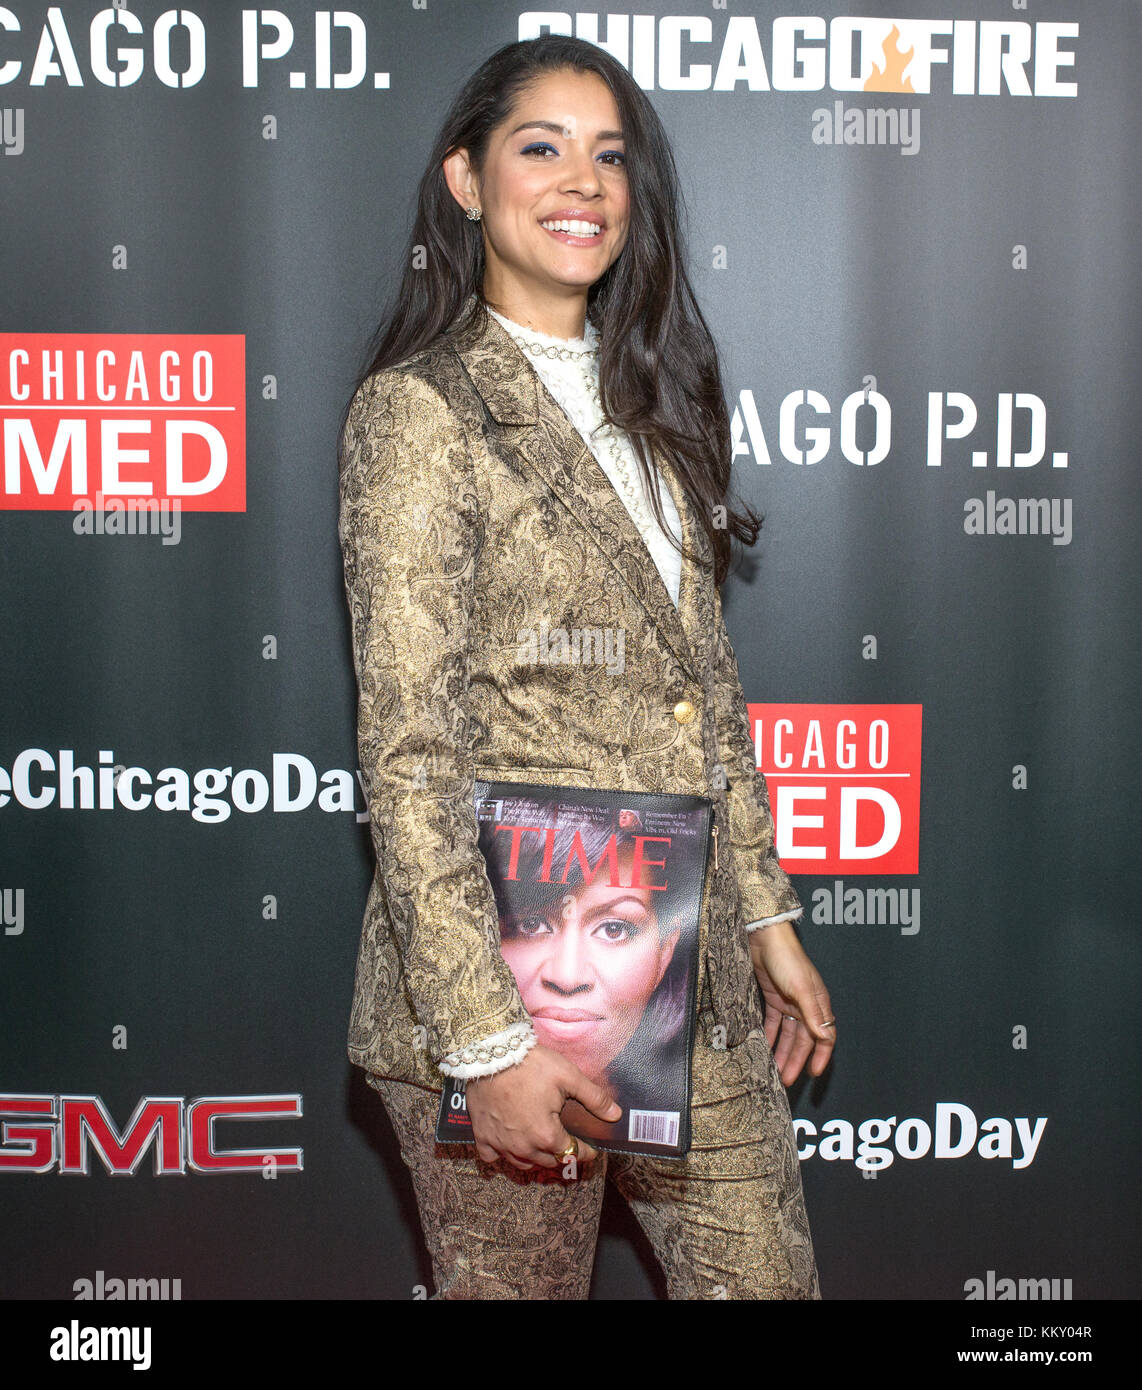 3rd annual NBC One Chicago Party featuring cast members from Chicago Fire, Chicago Med and Chicago P.D - Arrivals  Featuring: Miranda Rae Mayo Where: Chicago, Illinois, United States When: 30 Oct 2017 Credit: WENN Stock Photo